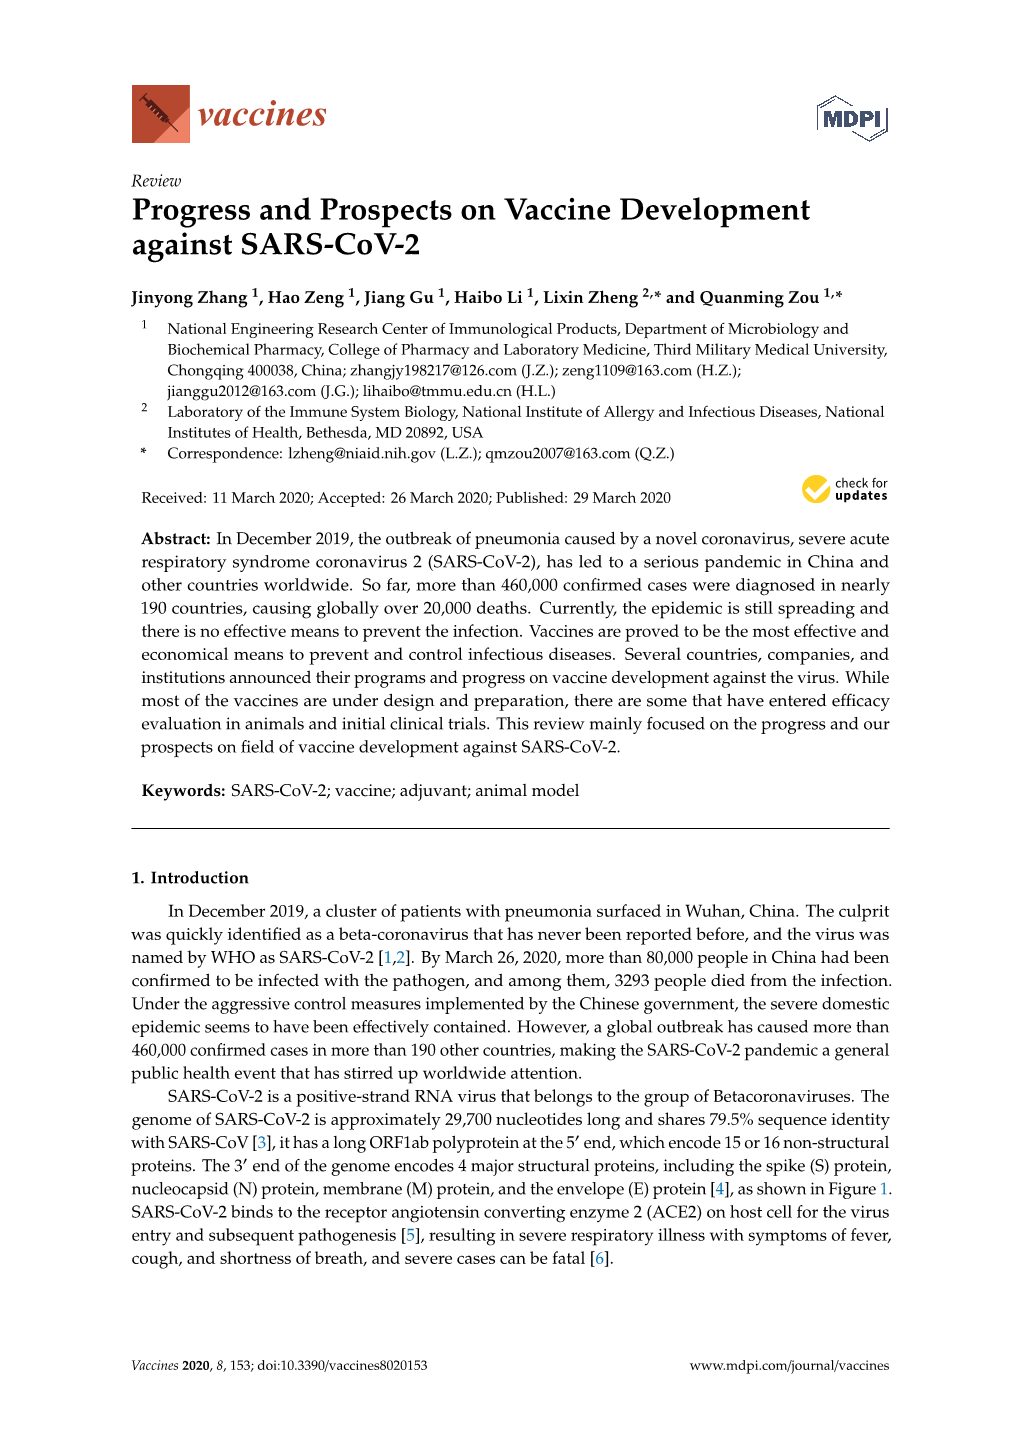 Progress and Prospects on Vaccine Development Against SARS-Cov-2